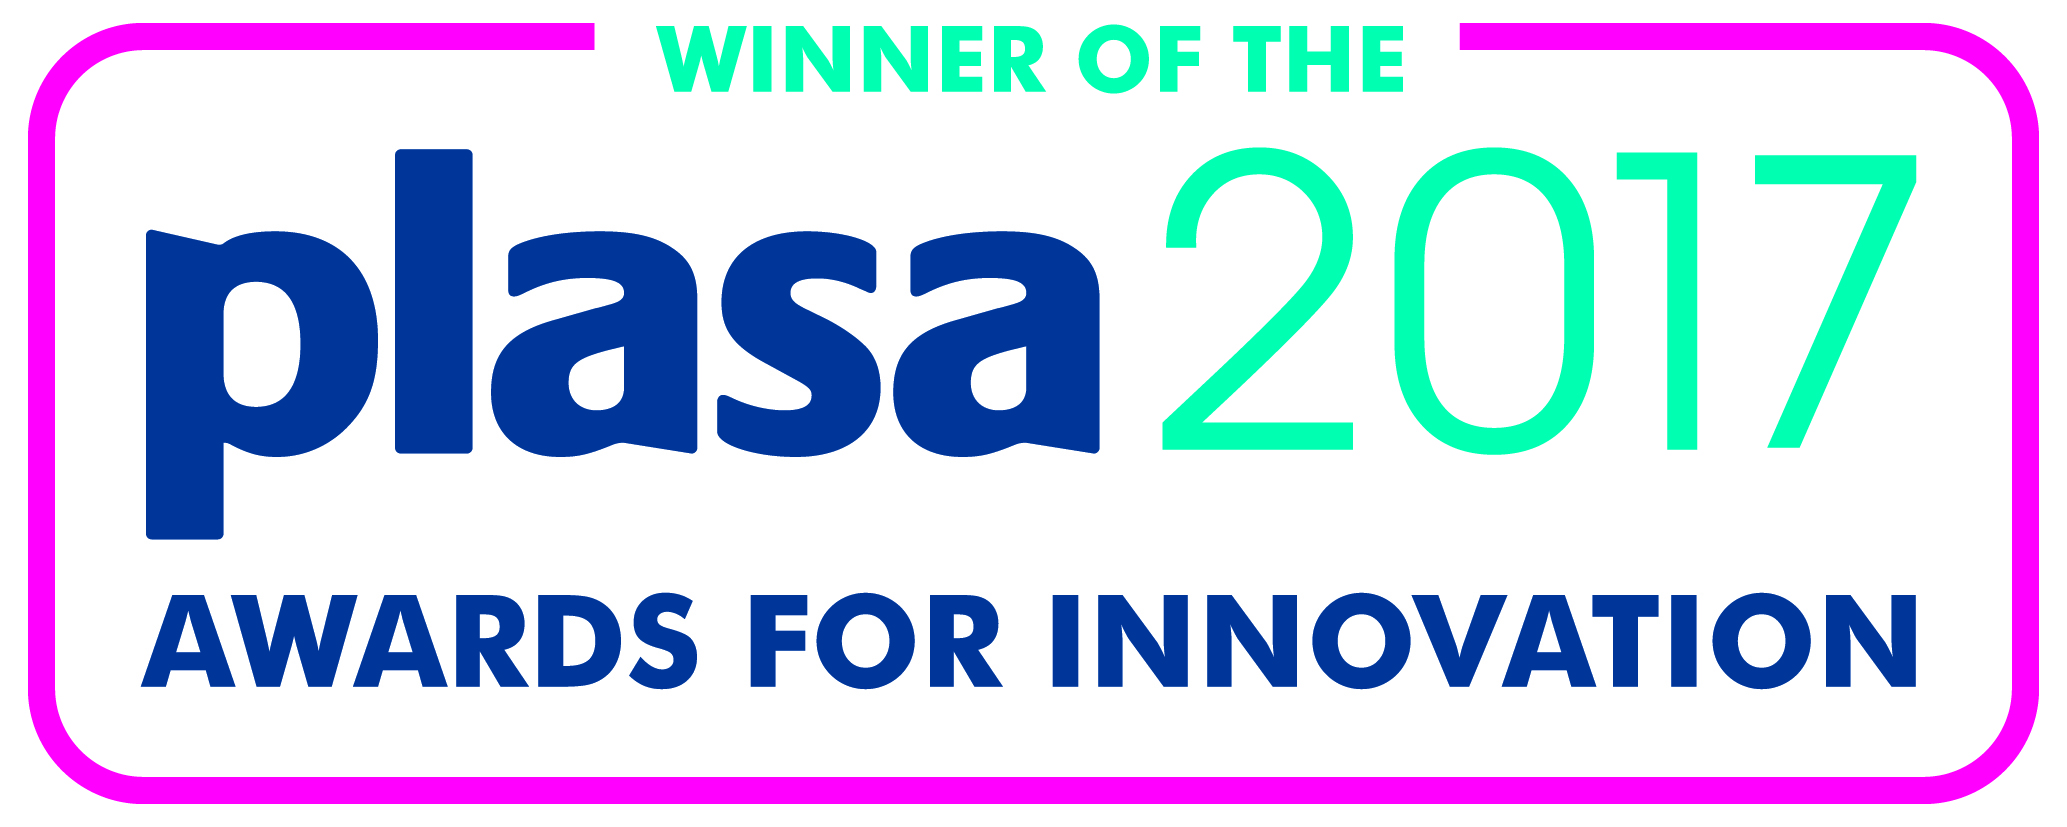 DMXcat is the Winner of the PLASA 2017 Award for Innovation